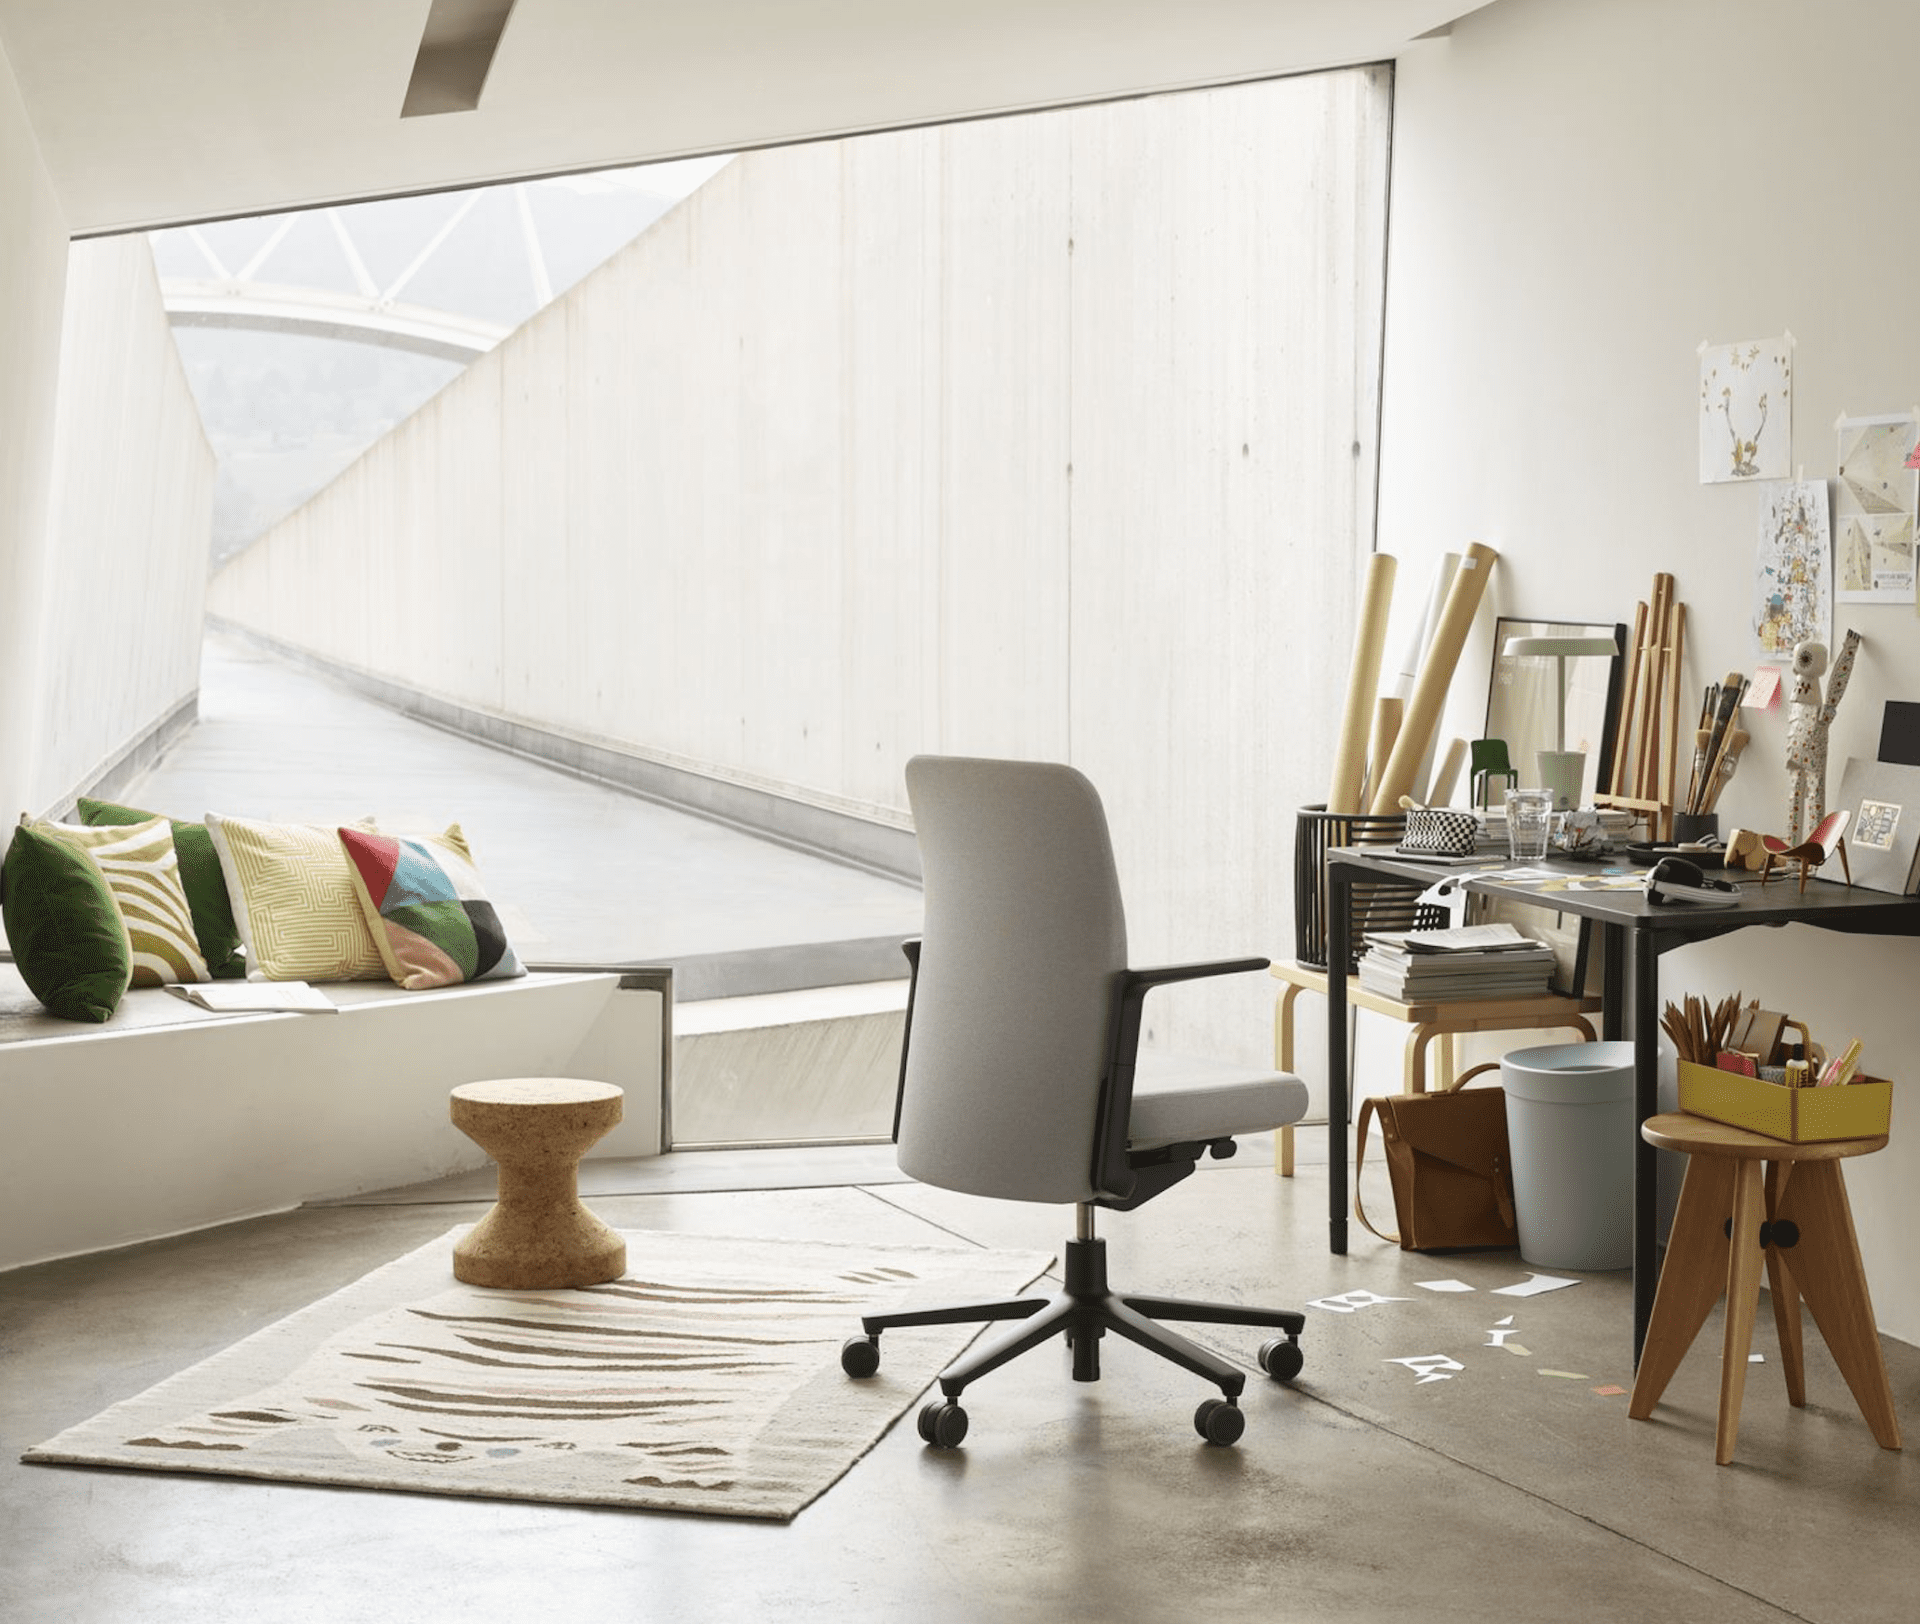 working from home, wfh, vitra, home office, home working, home office inspiration, OnOffice magazine